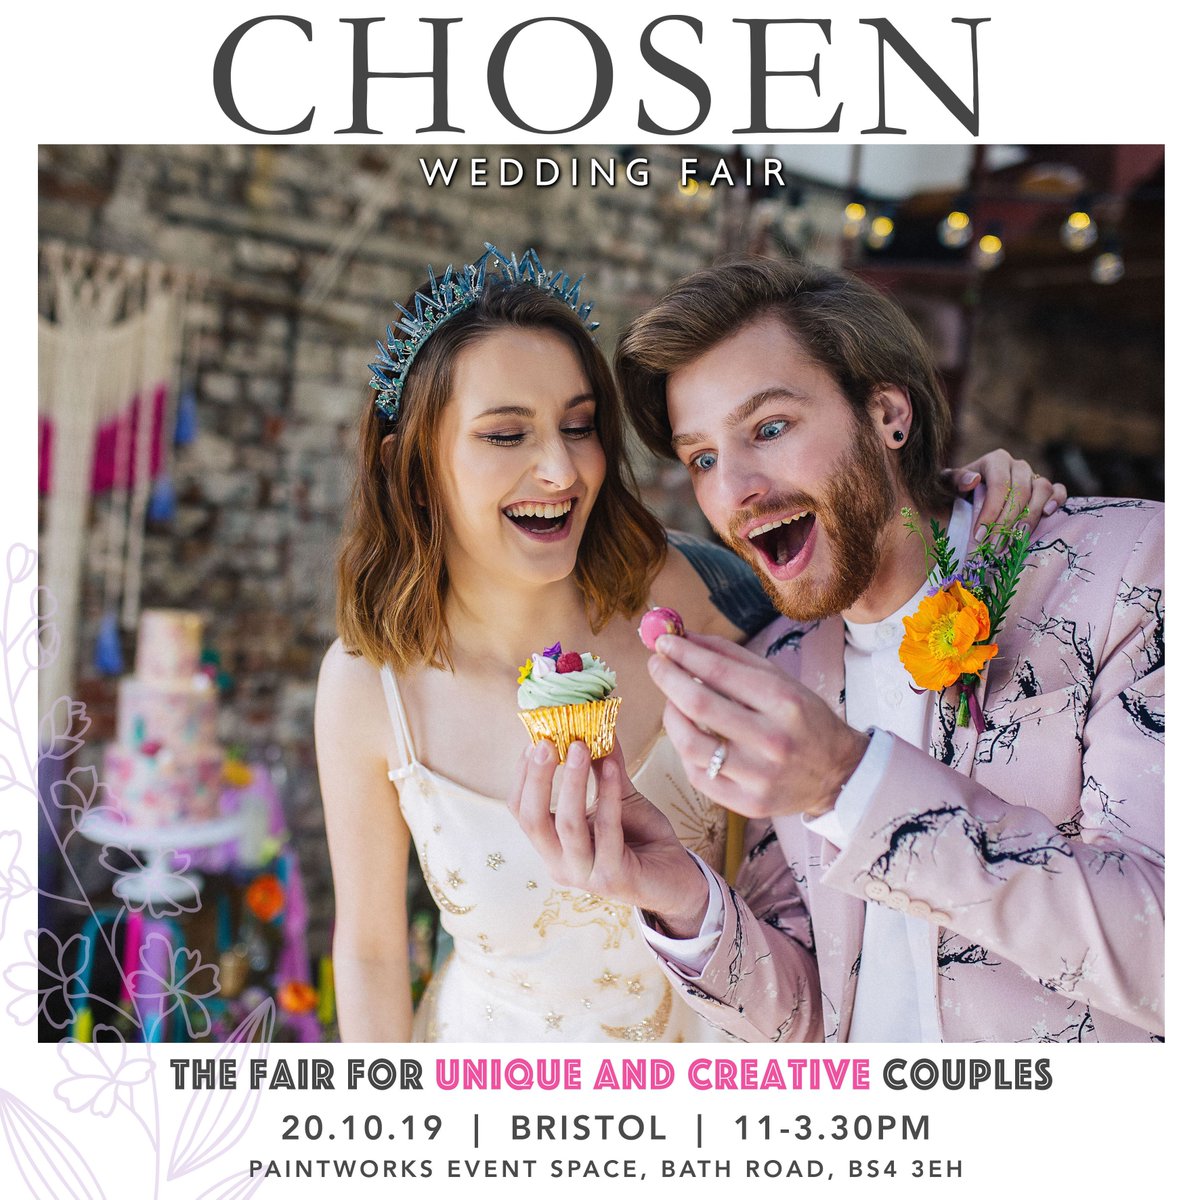 Were so excited to be exhibiting at the Chosen Wedding Fair at The Paintworks in Bristol this weekend! If you're looking for something different, want inspiration and a look at some awesome local suppliers then this is the place to be! #hirethelot #weddingsupplier #bristolbride